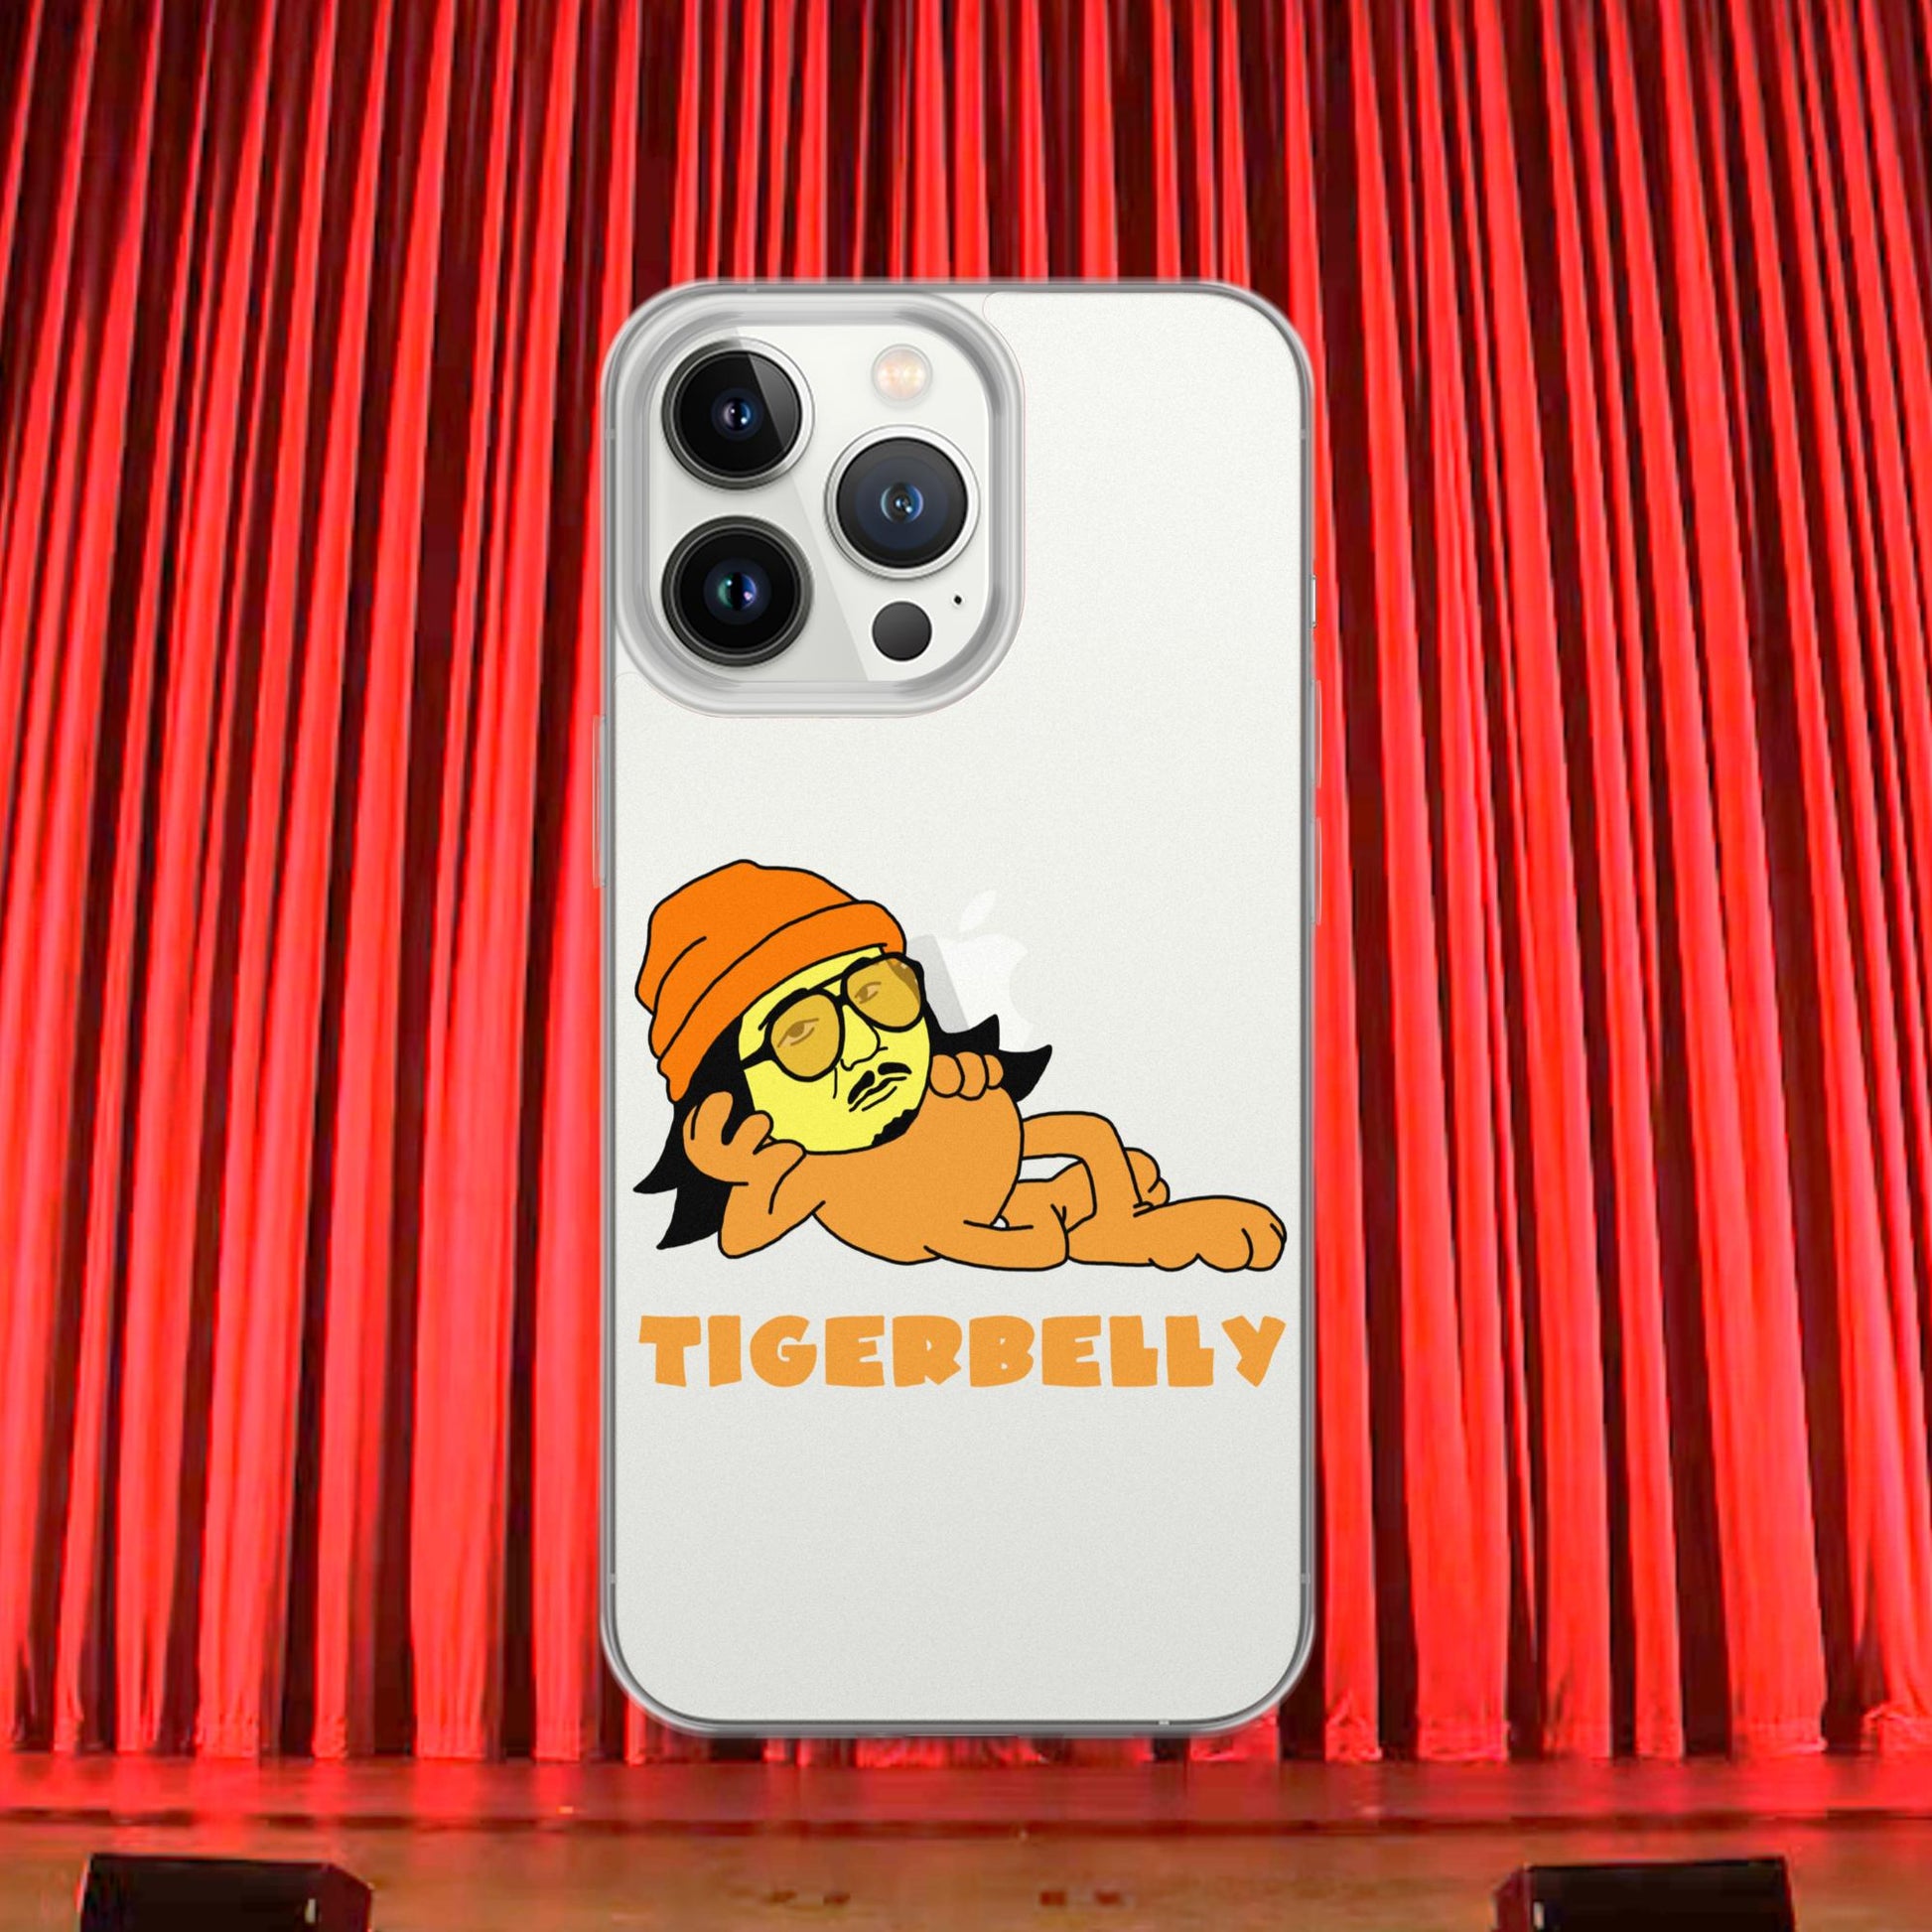 Bobby Lee Tigerbelly, Bobby Lee Merch, Tigerbelly Merch, Bobby Lee Gift, Funny Tigerbelly Gift, Tigerbelly Podcast, TigerBelly Clear Case for iPhone Next Cult Brand Bobby Lee, Podcasts, Stand-up Comedy, TigerBelly